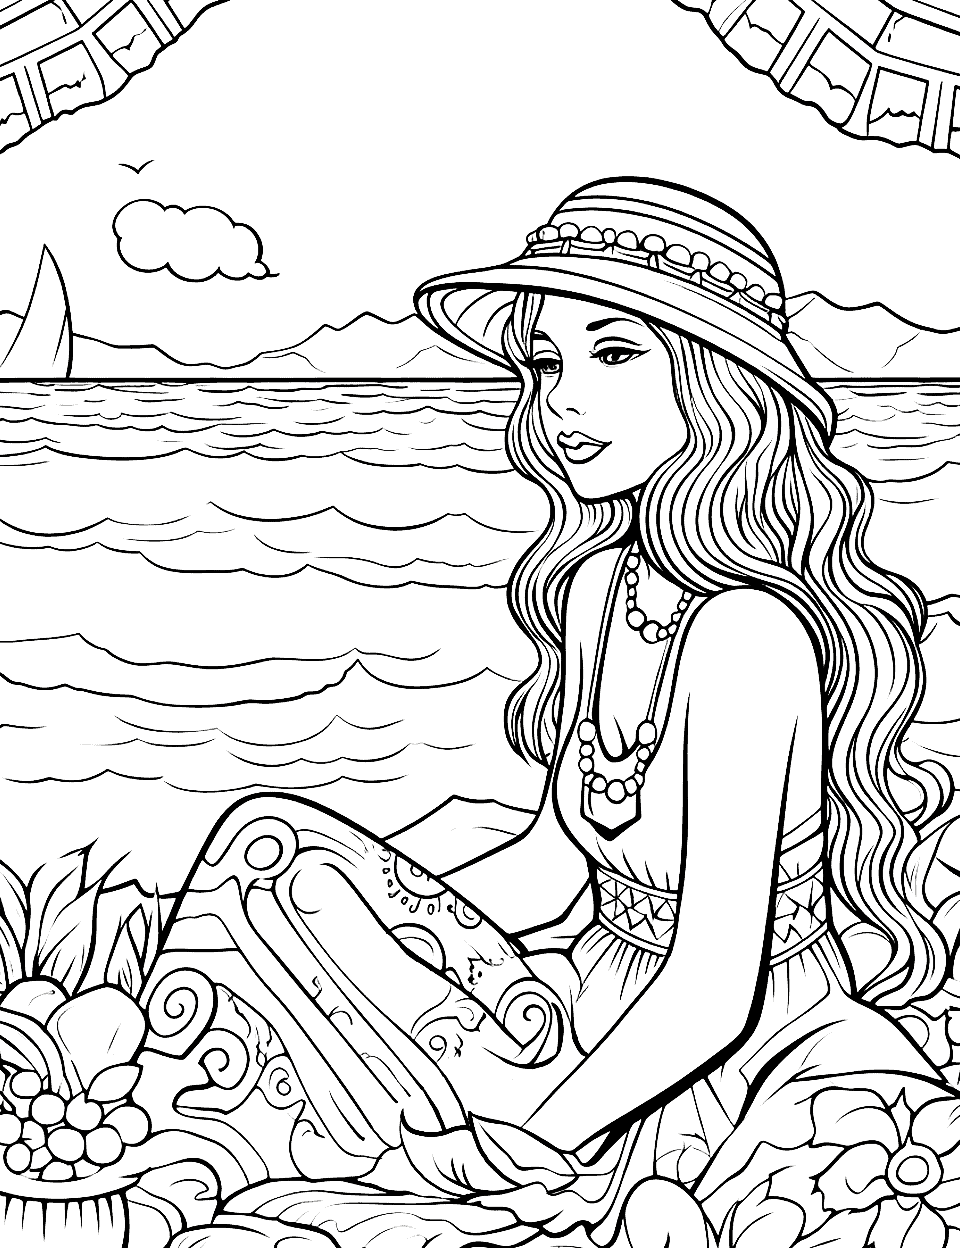 Summer Beach Adult Coloring Page - A summer beach scene with intricate details for adults to color.